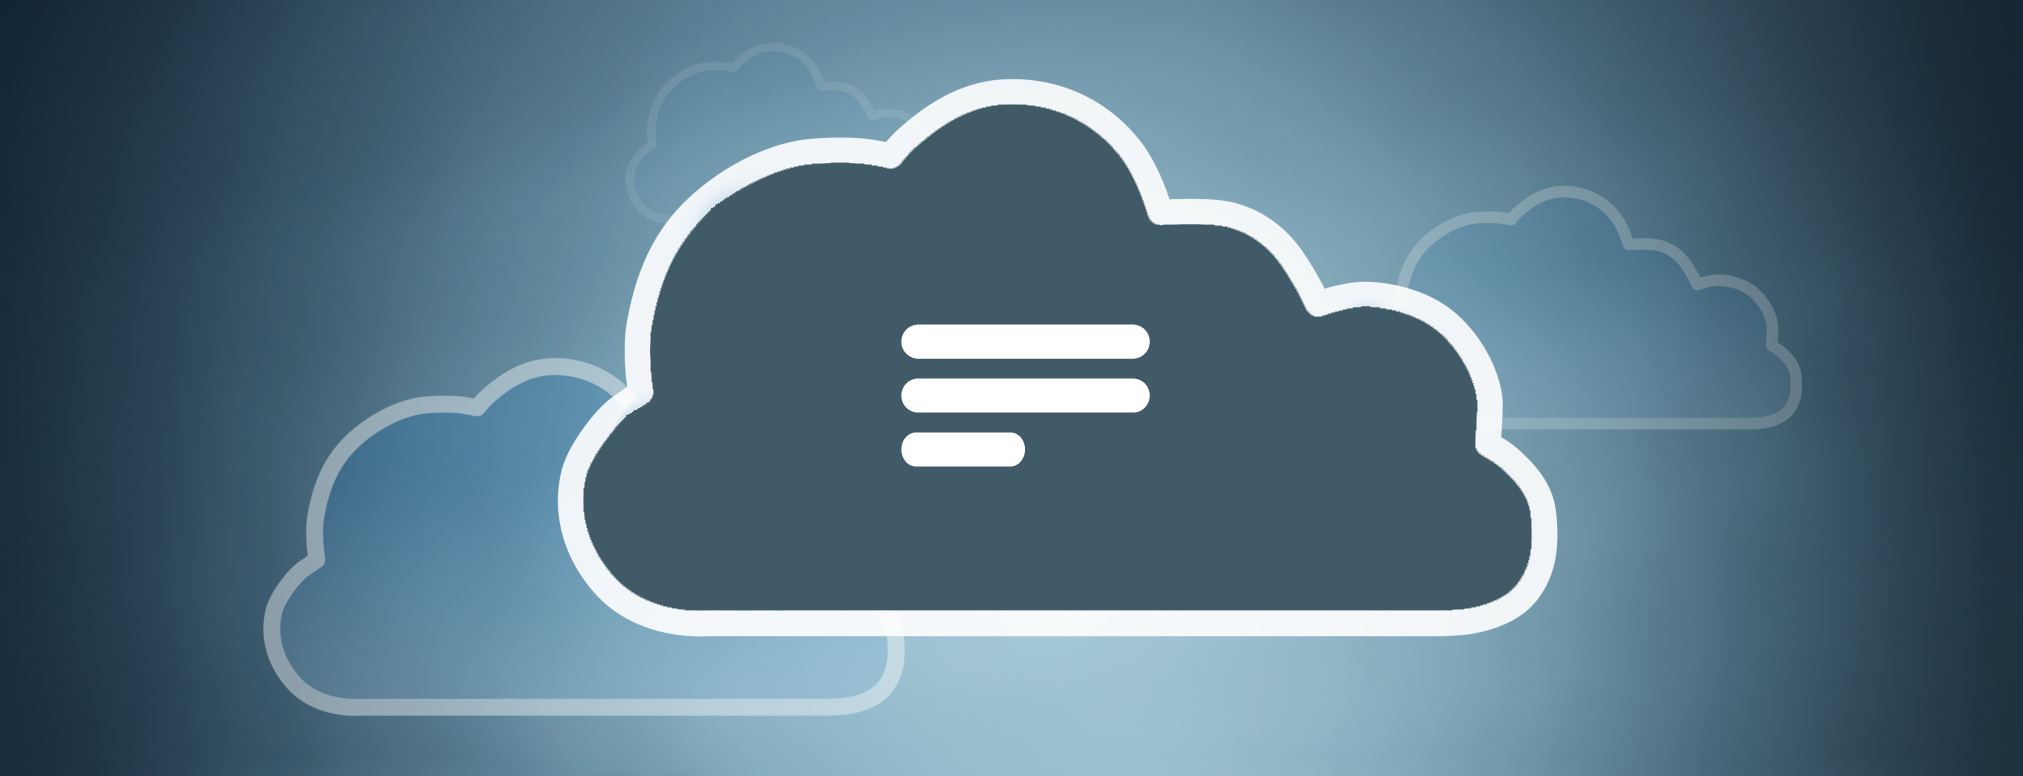 3 reasons why cloud solutions are effective